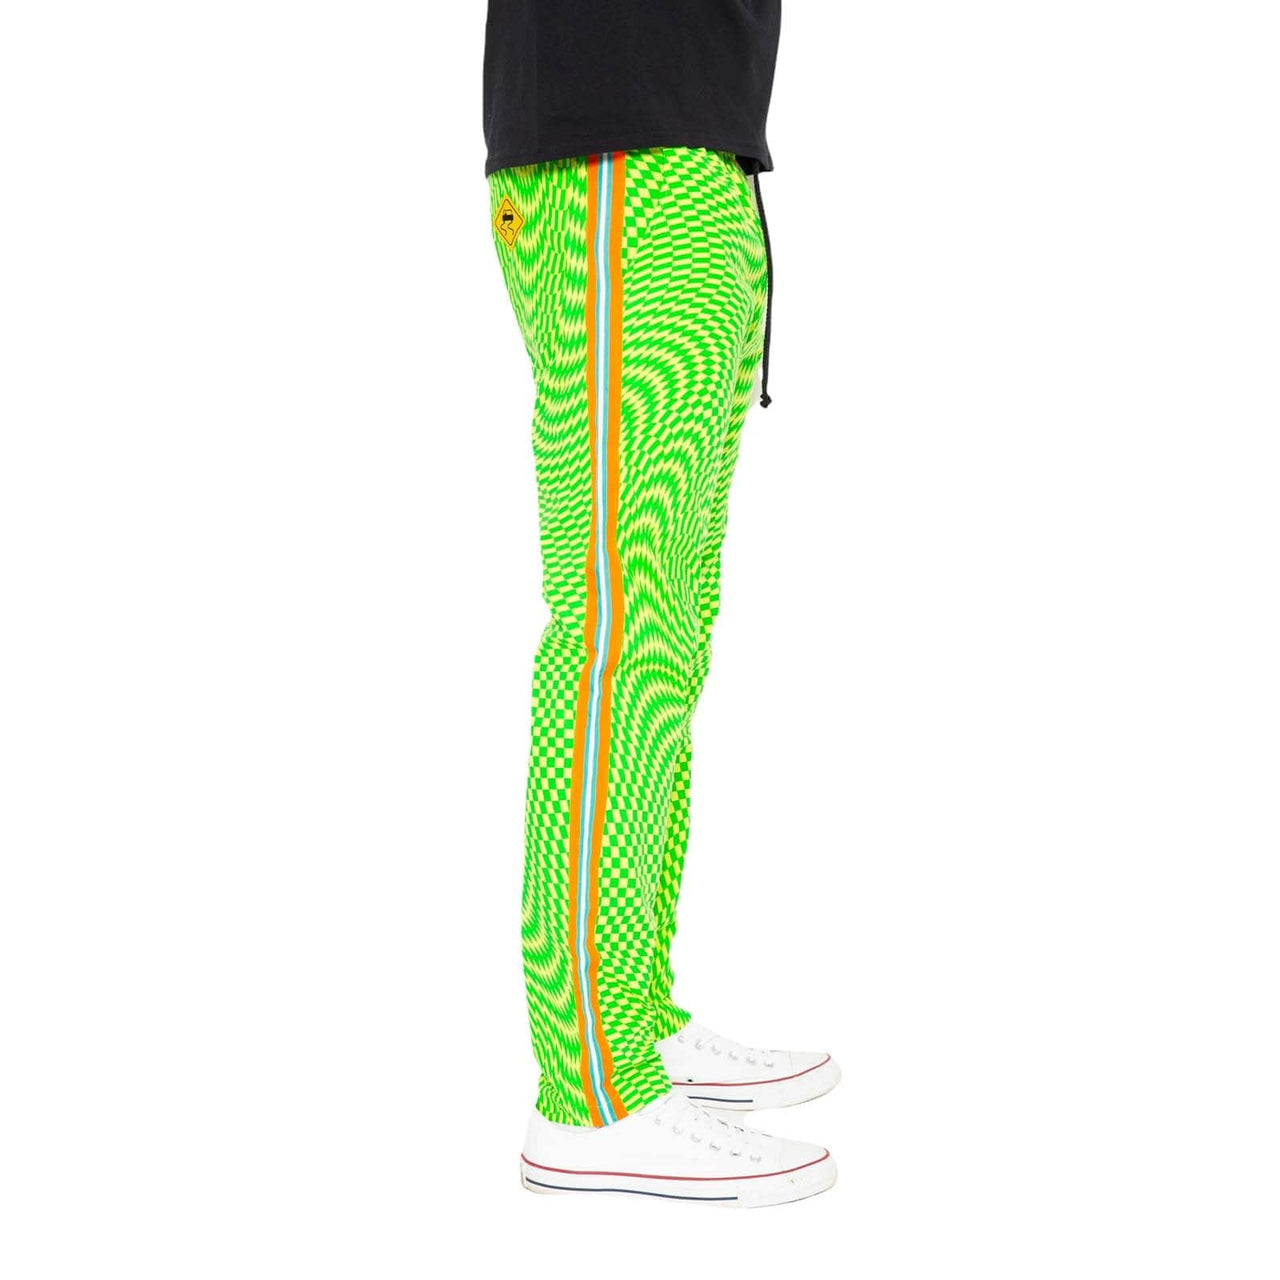 Skidz Pants Track Pant - Trippy Check Lime & Green with Orange